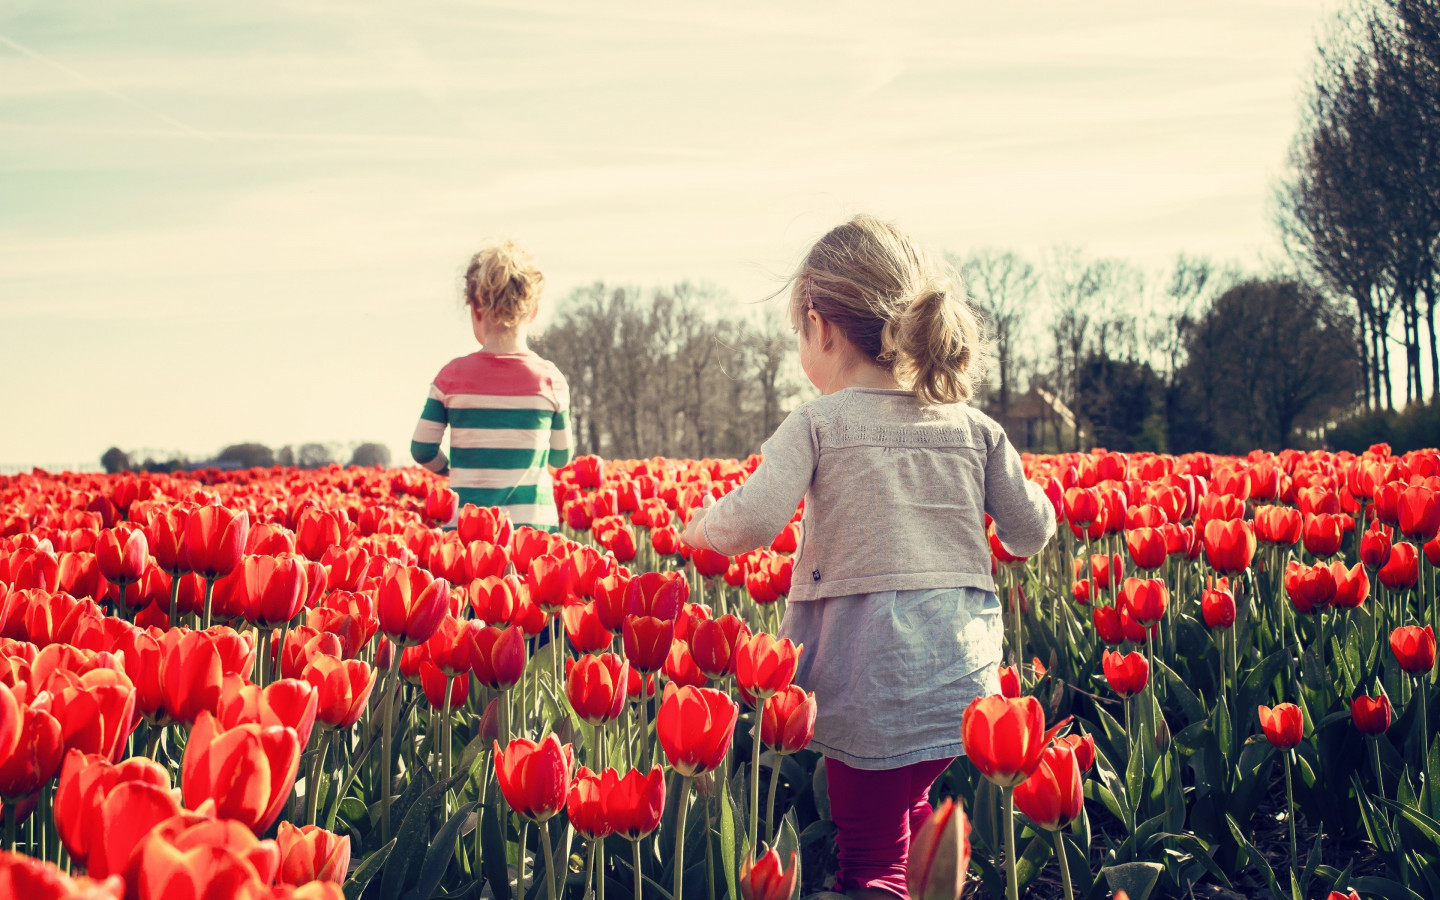 Children in the land with tulips wallpaper 1440x900